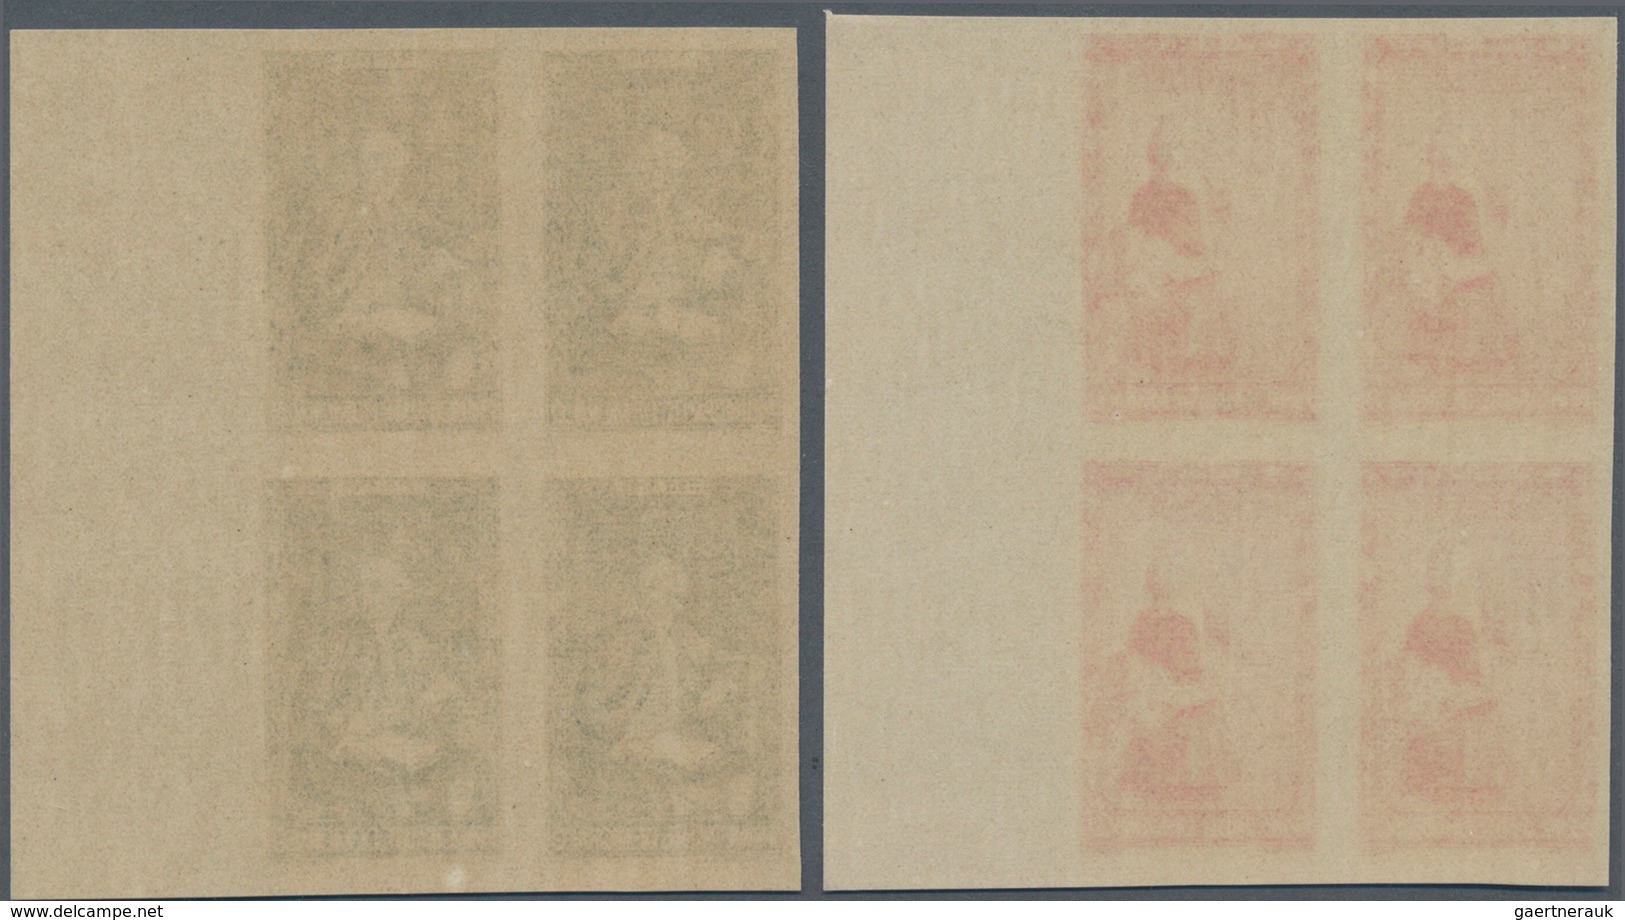 Monaco: 1942, Princes and Princesses of Monaco complete set of 15 in IMPERFORATE blocks of four from